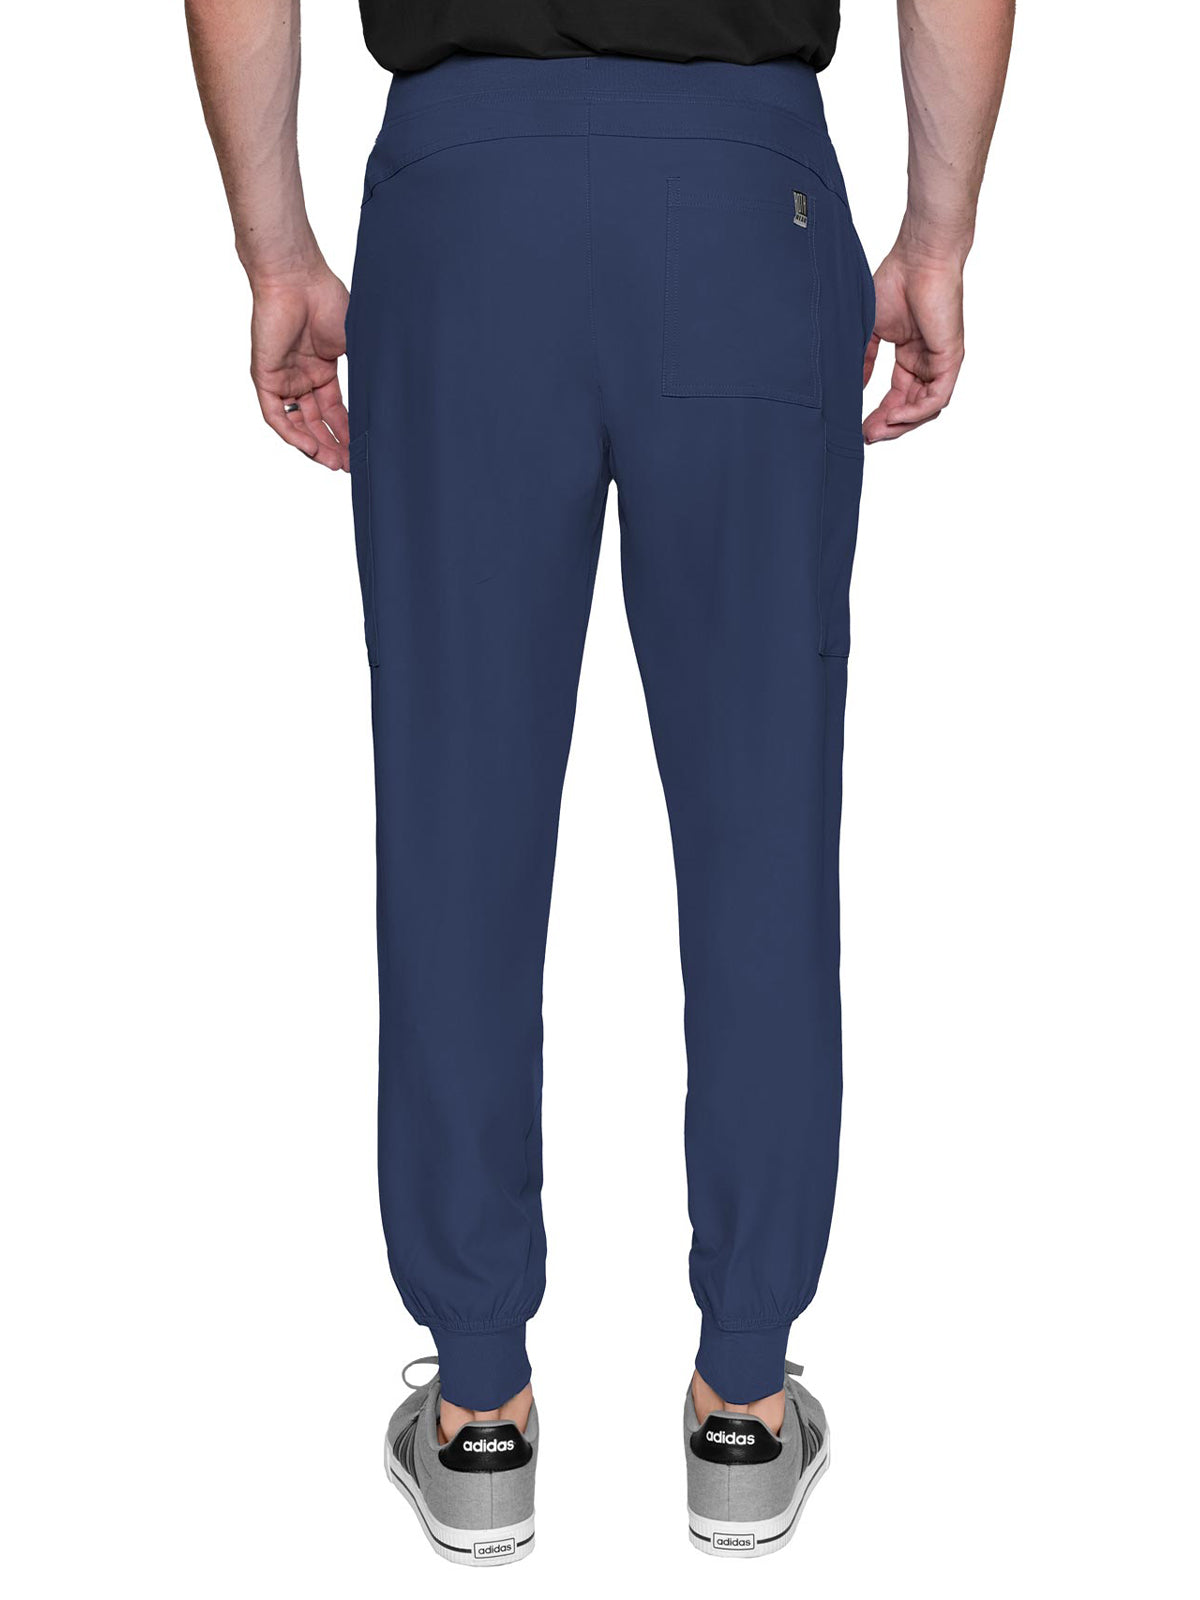 Men's Athletic-Inspired Pant